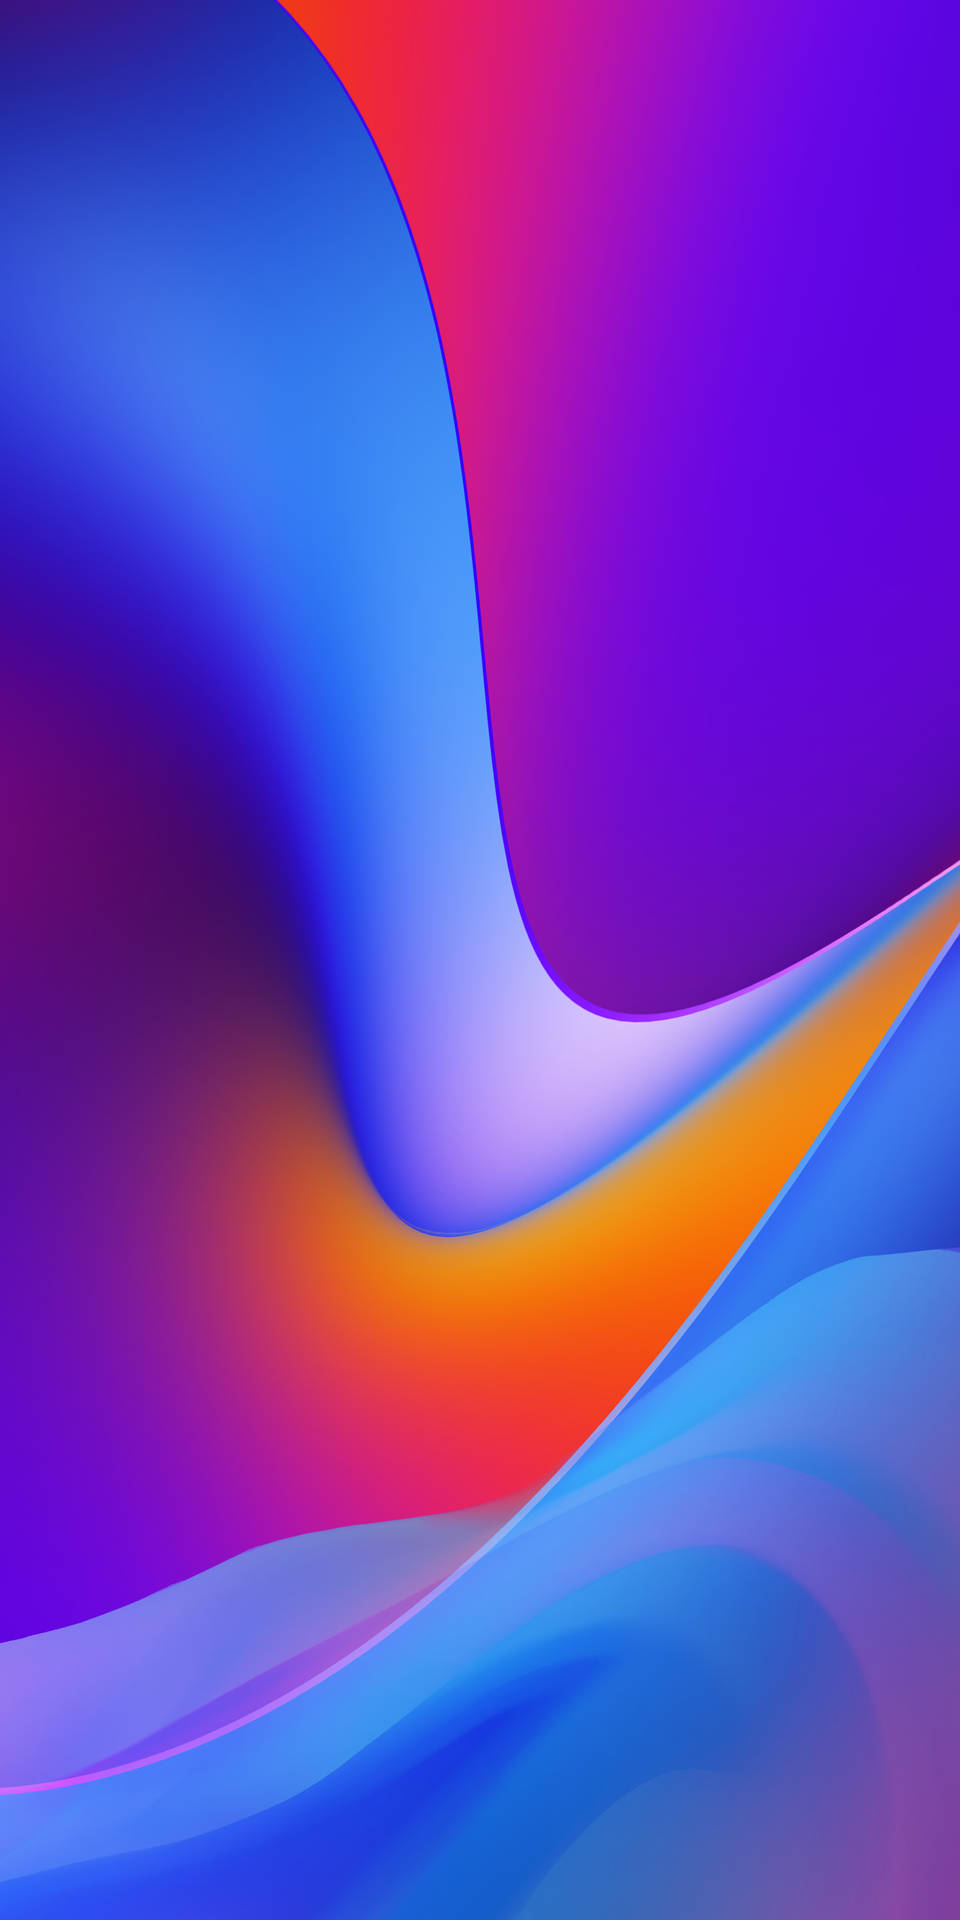 Vibrant Abstract Ripple Oppo A5s Wallpaper